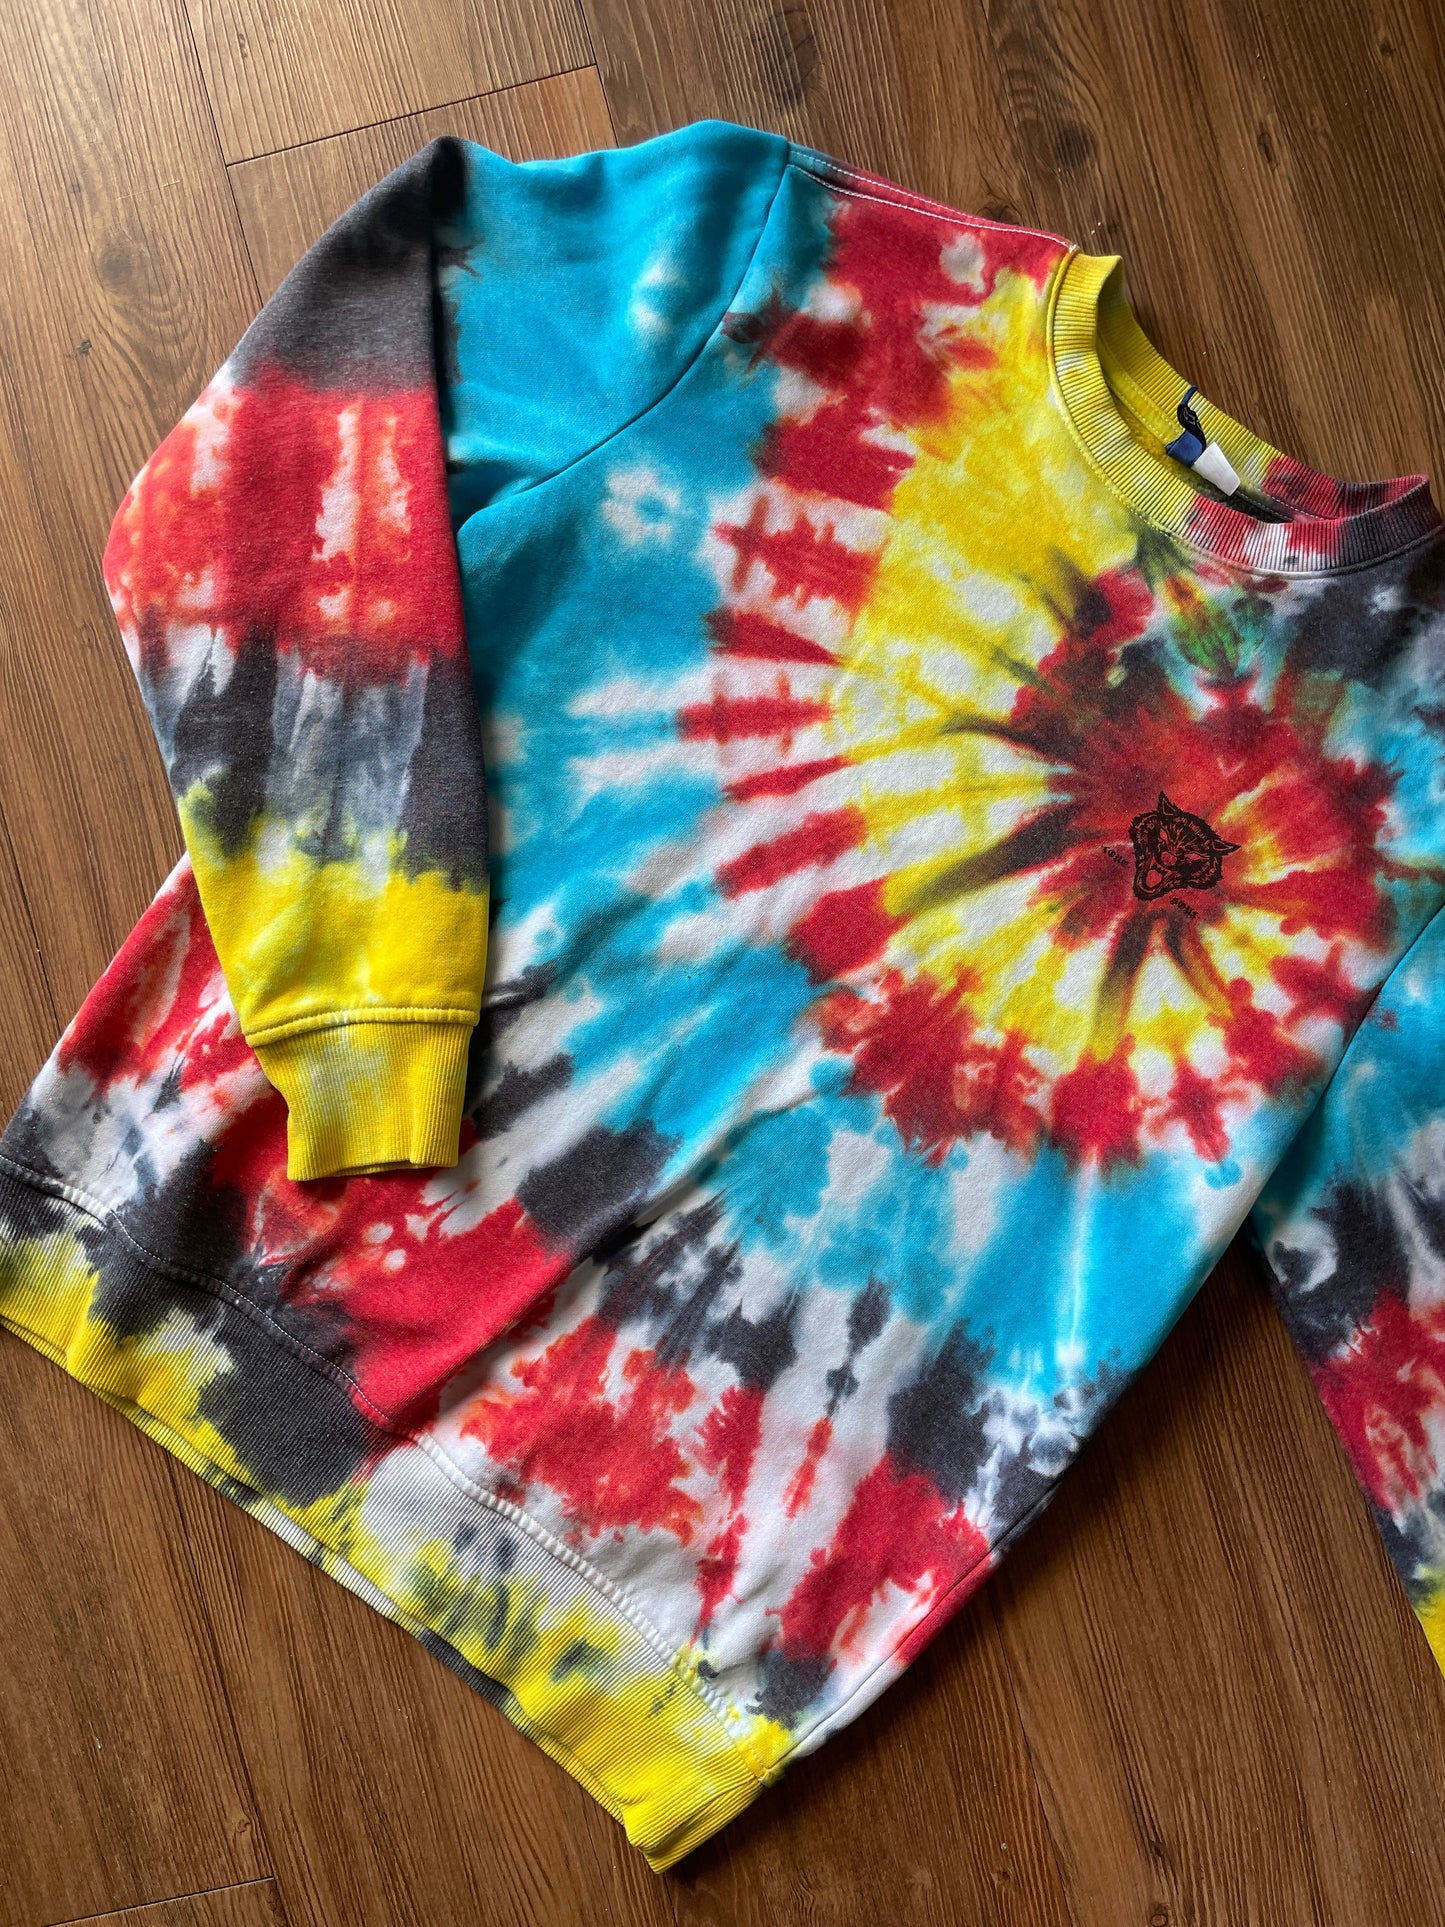 SMALL Men’s Last Night Tiger Tie Dye Sweatshirt | Red, Yellow, Blue, and Black Spiral Long Sleeve